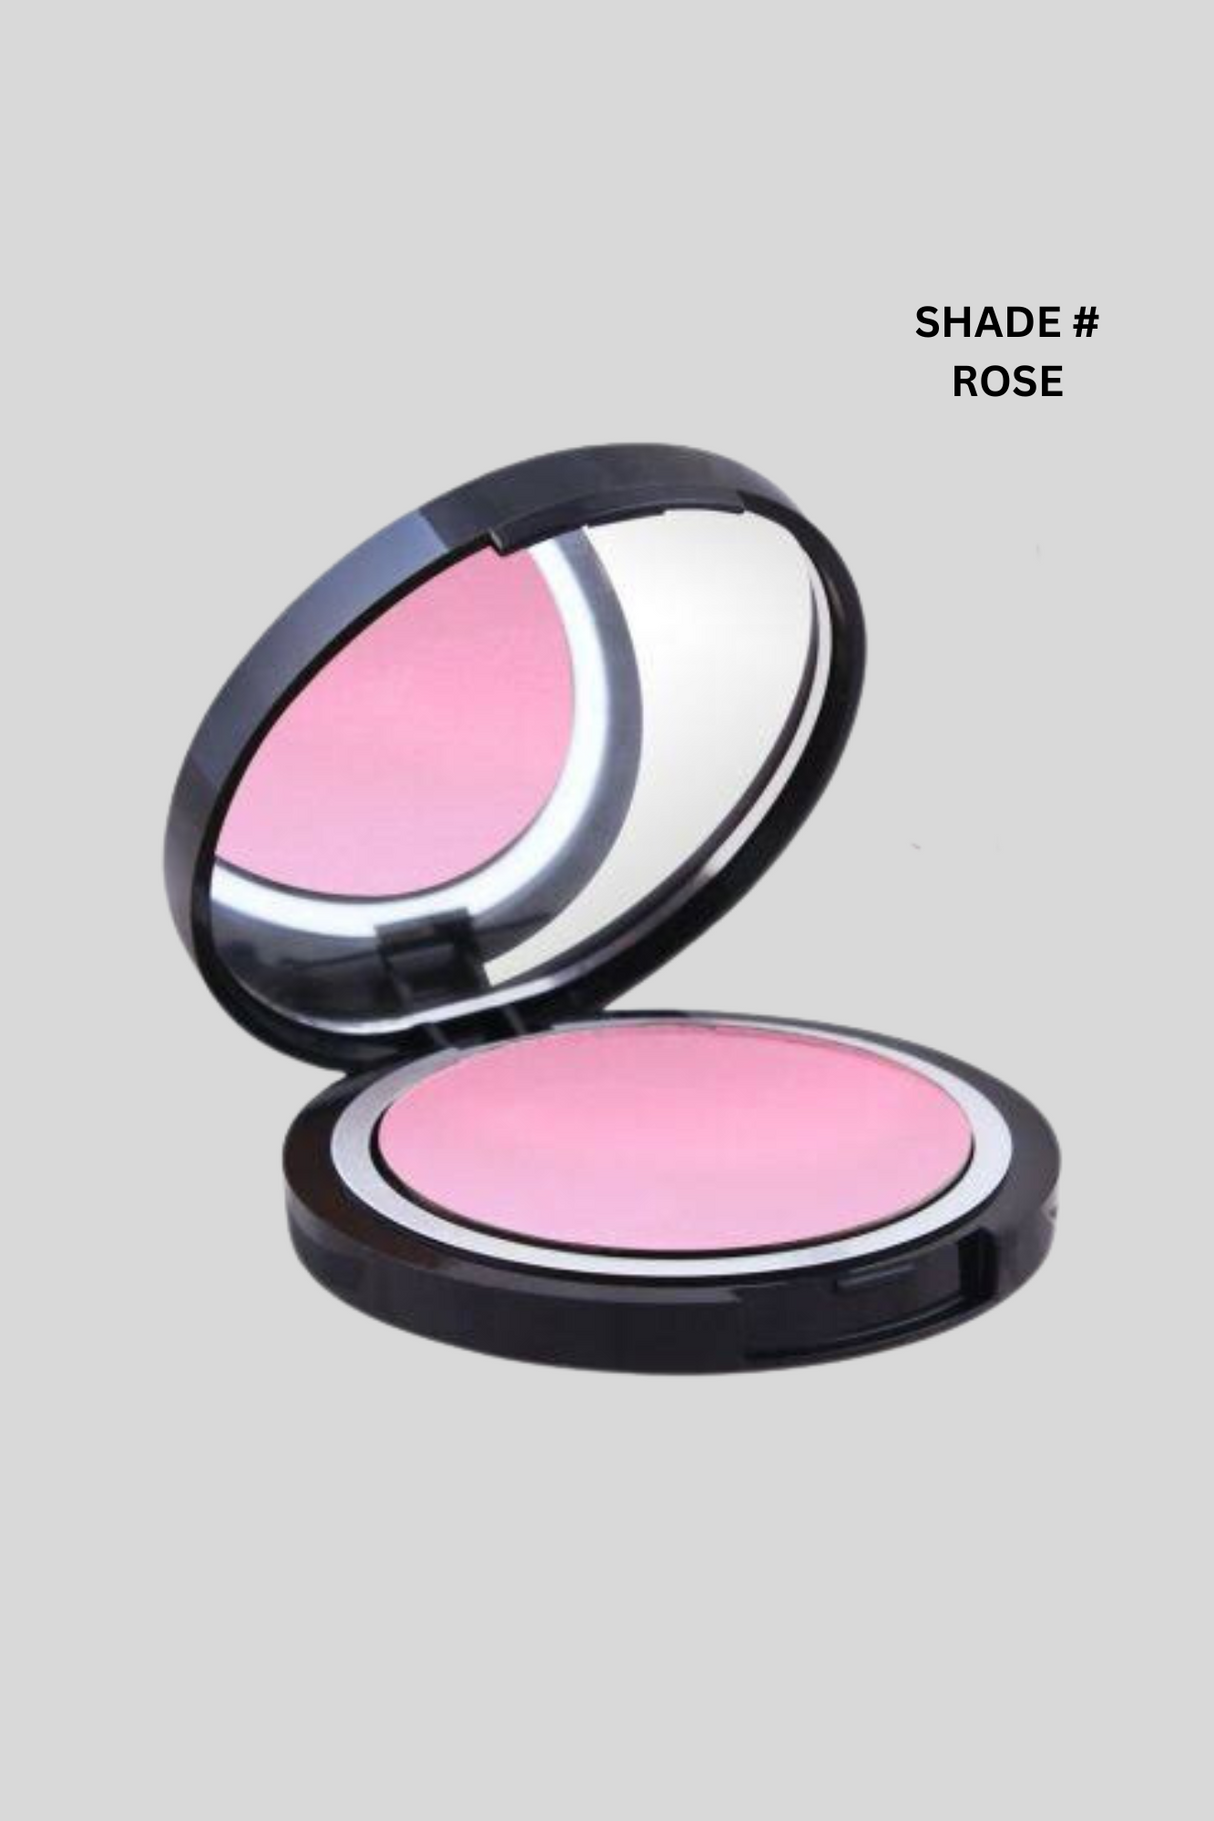 sweet touch blush on rose 4g